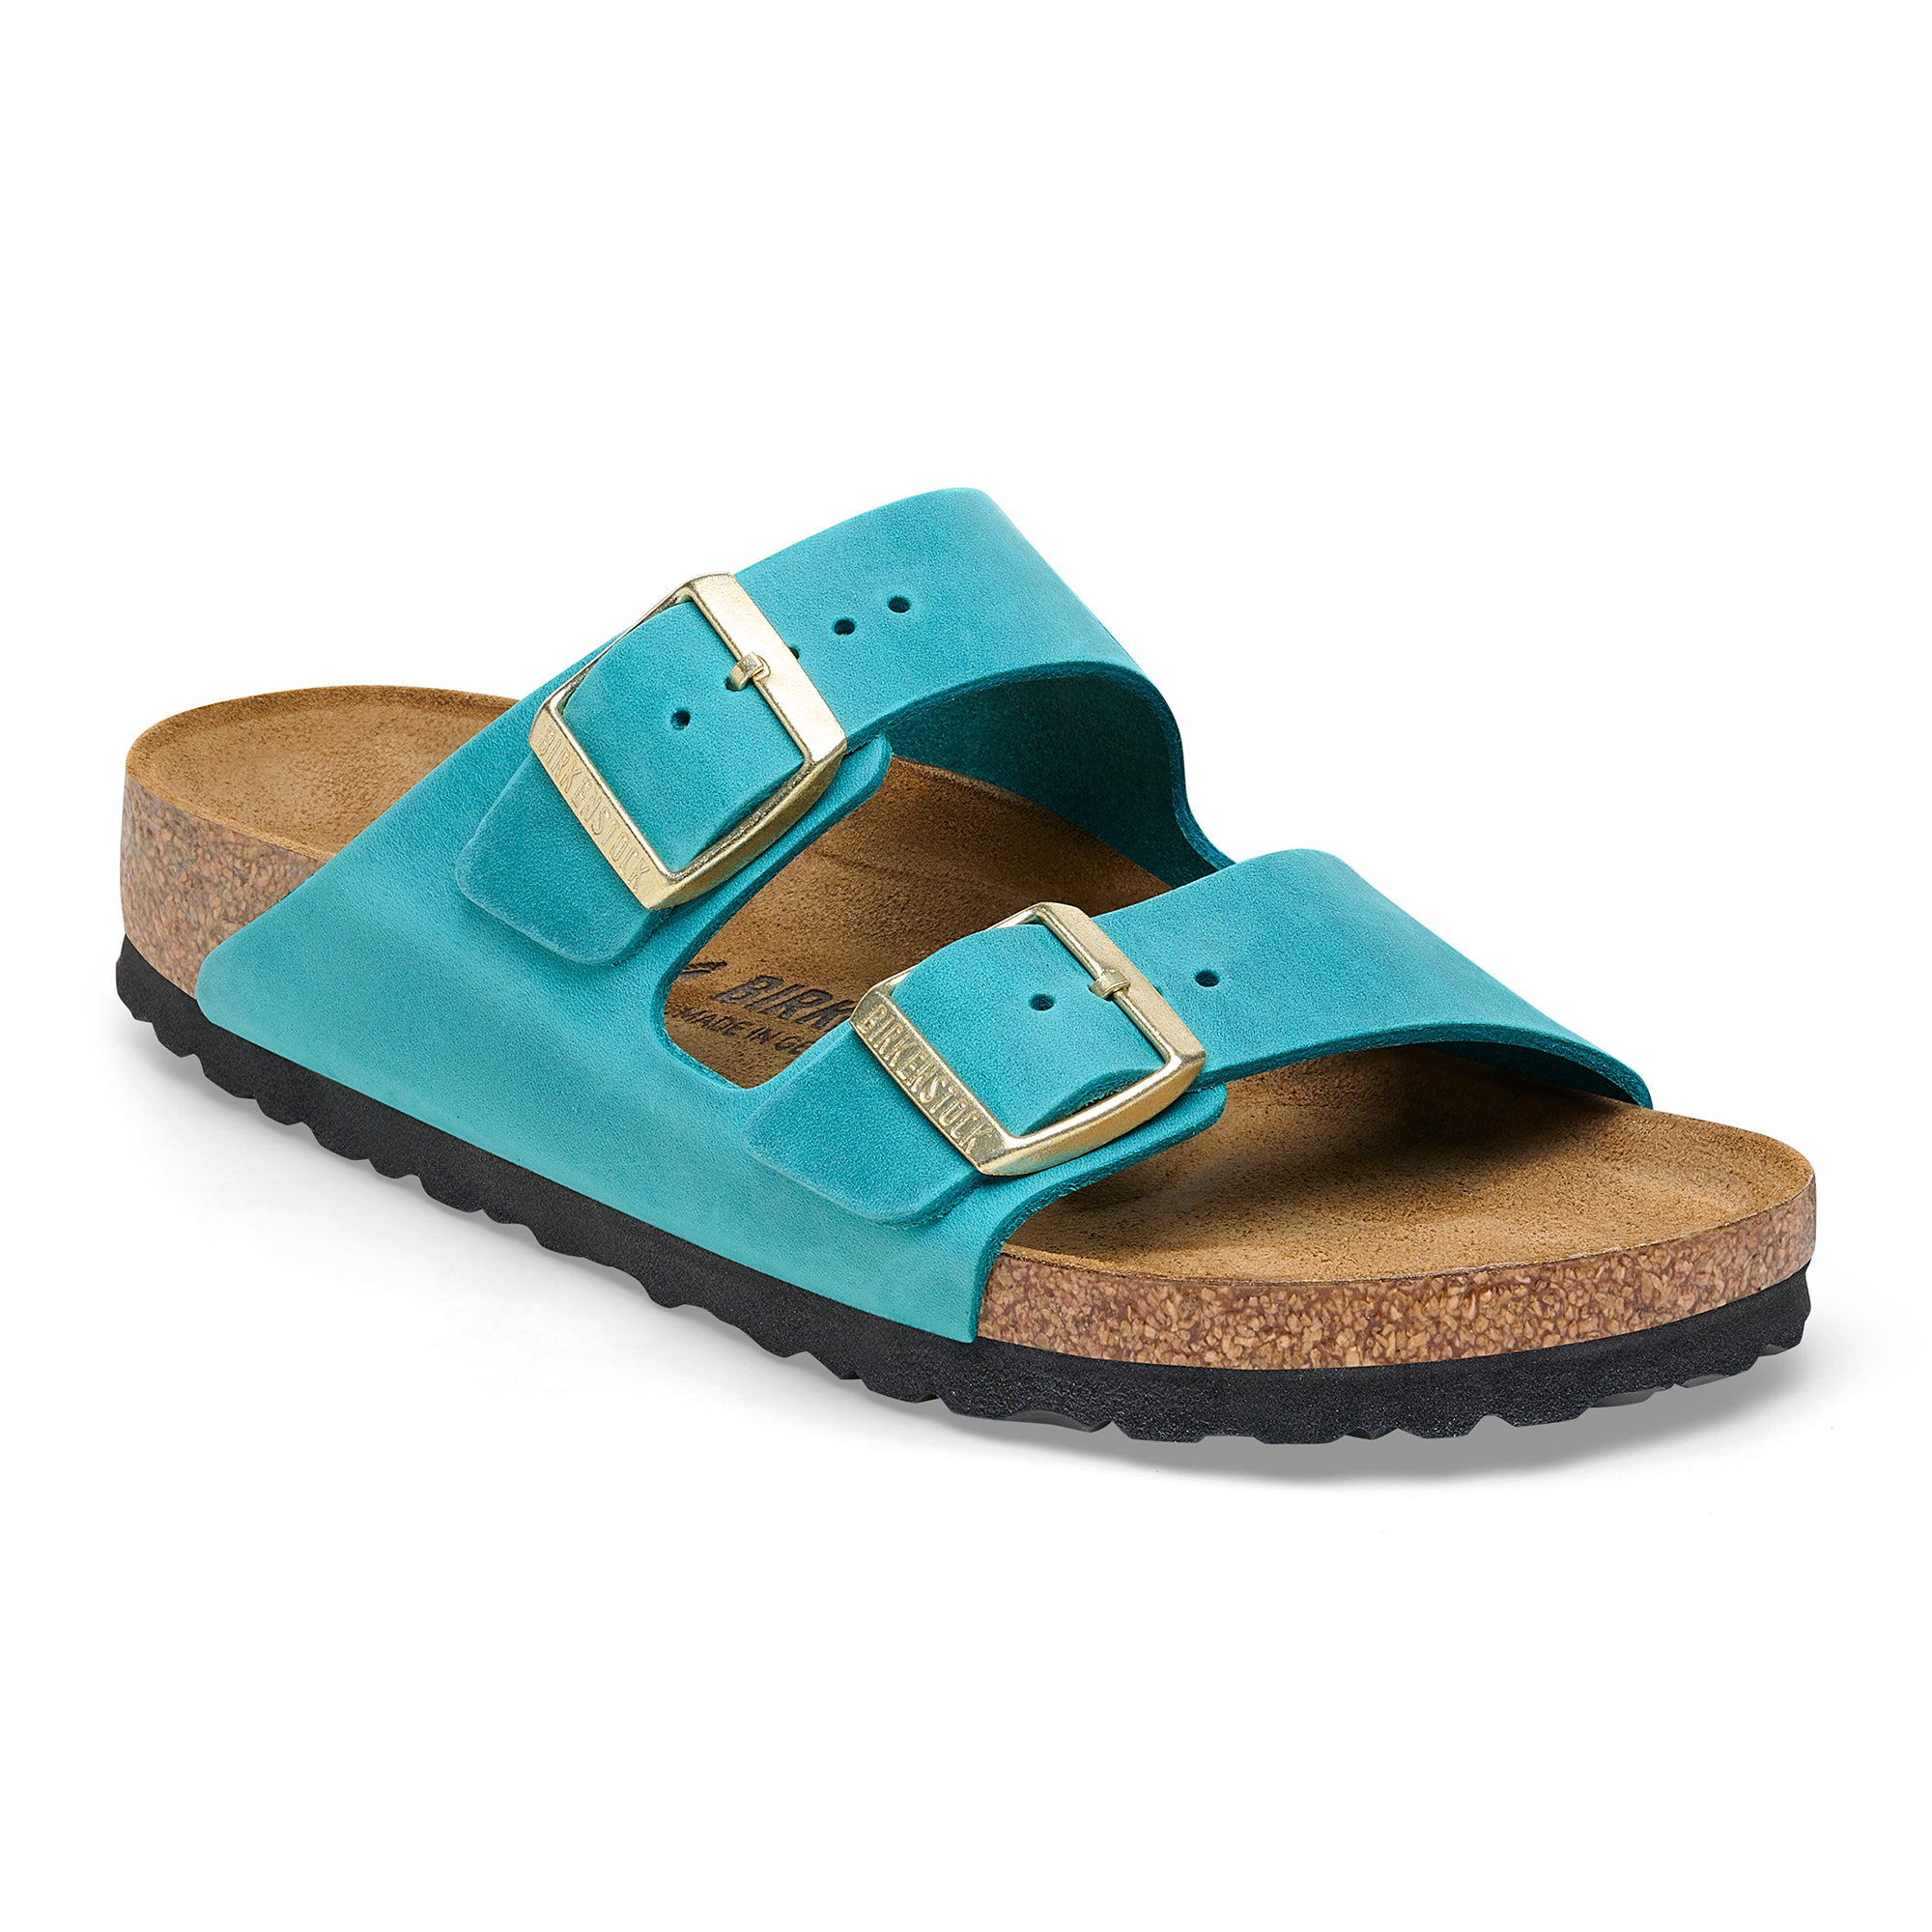 Birkenstock Limited Edition Arizona biscay bay oiled leather